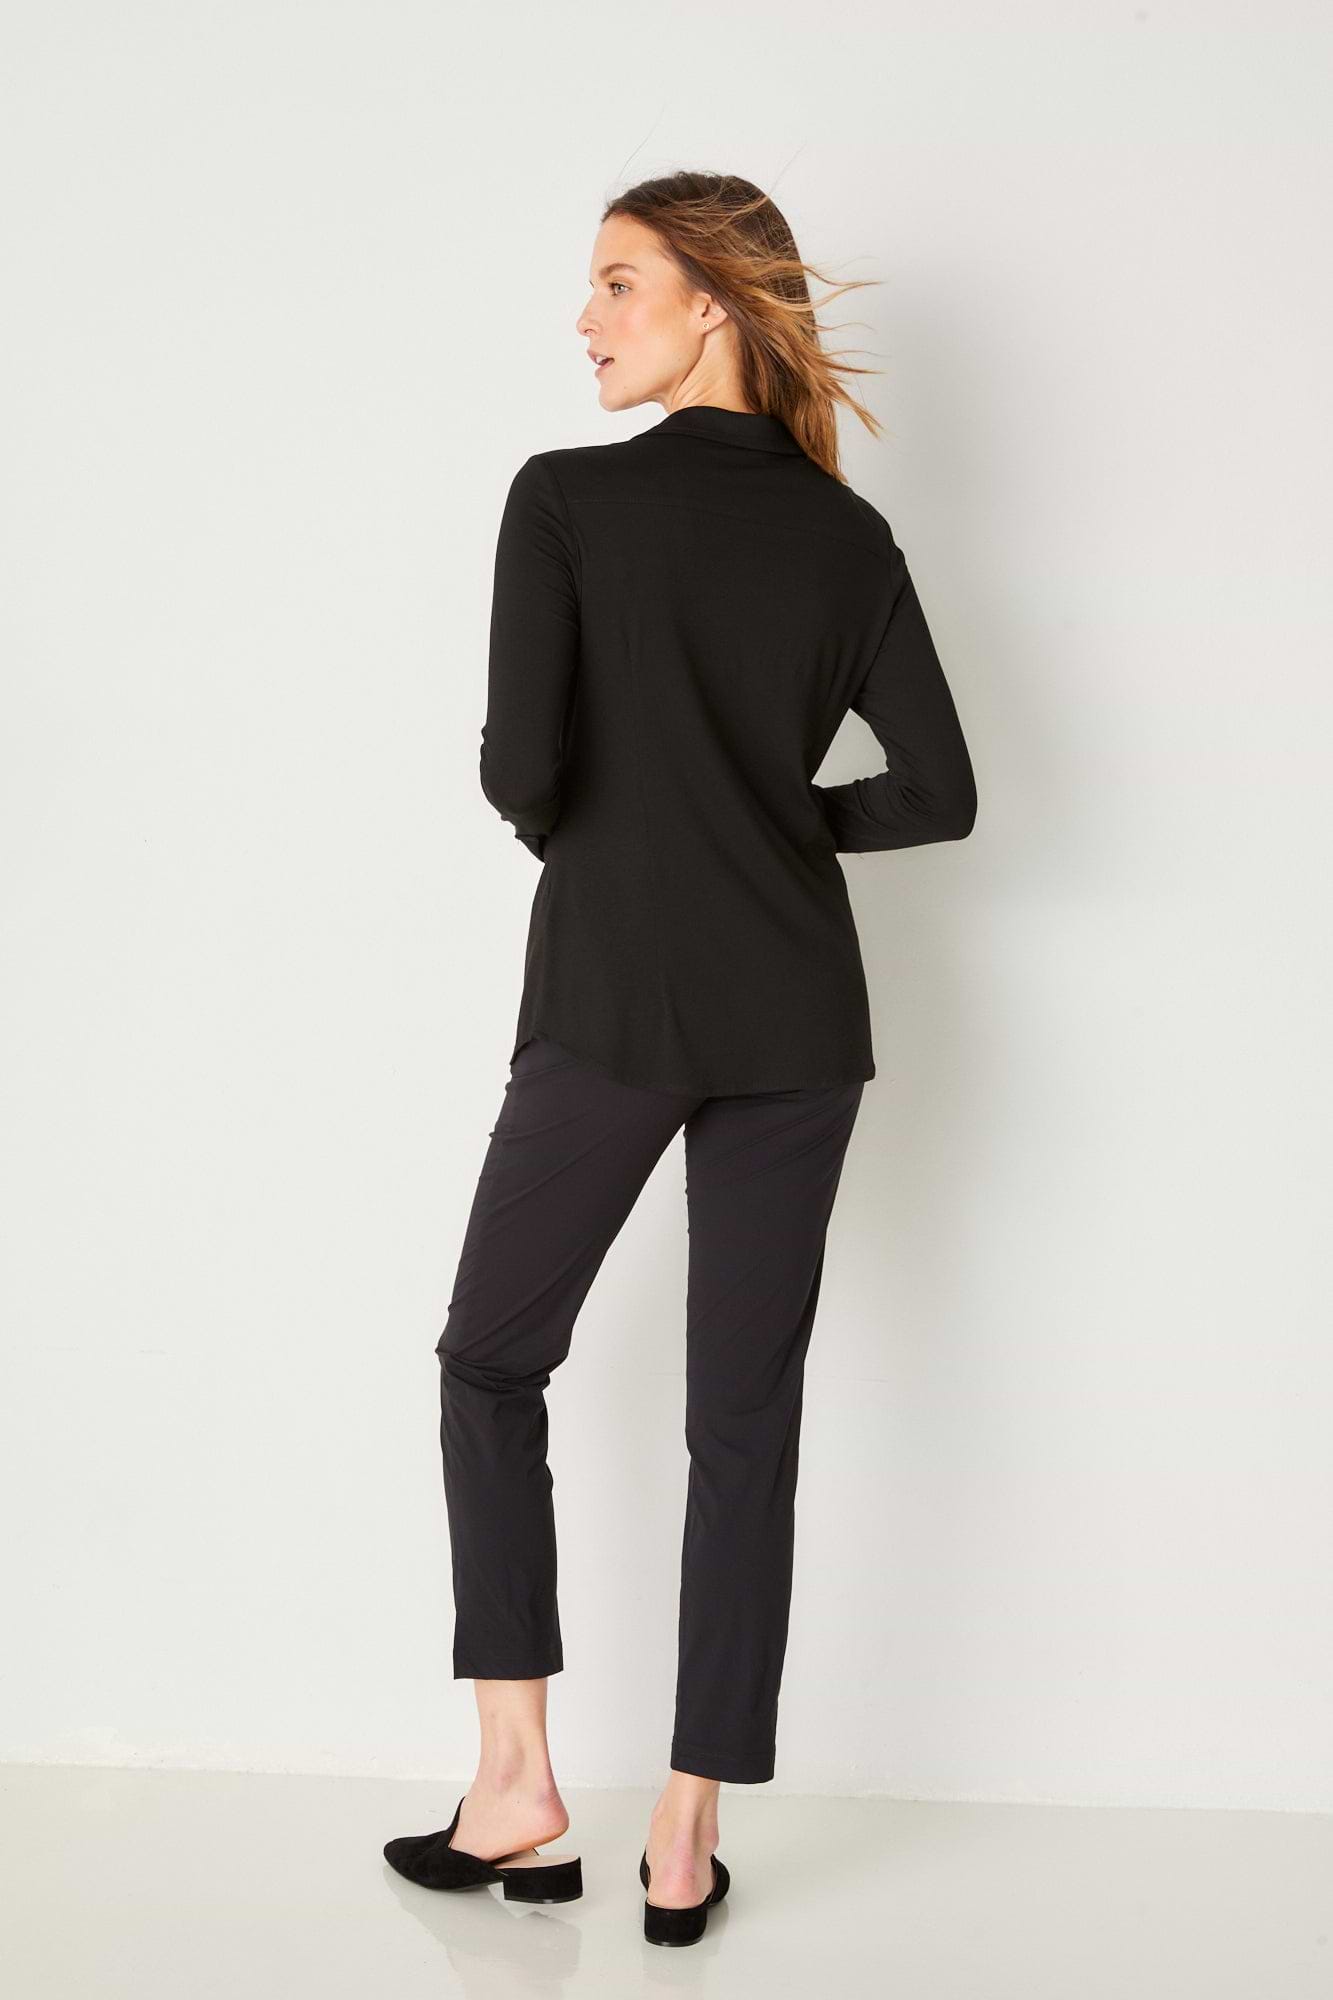 The Best Travel Shirt. Woman Showing the Back Profile of a Nikki Longsleeve Jersey Shirt in Black